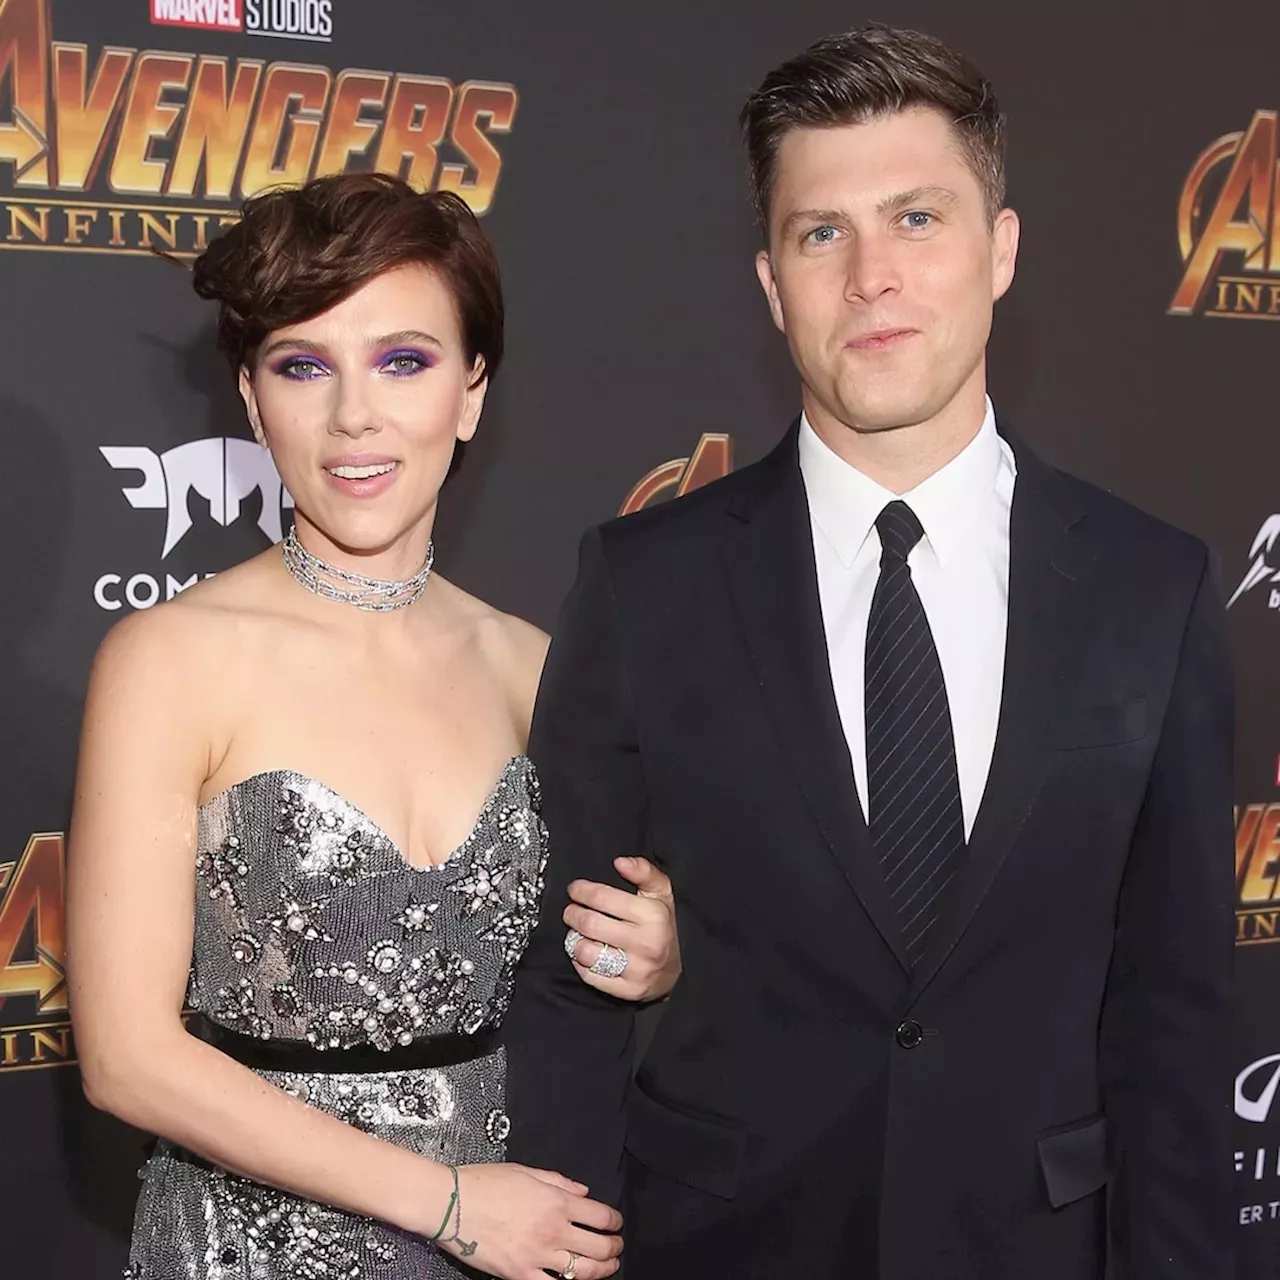 Scarlett Johansson and Colin Jost Put Their Chemistry on Display in Bloopers Clip